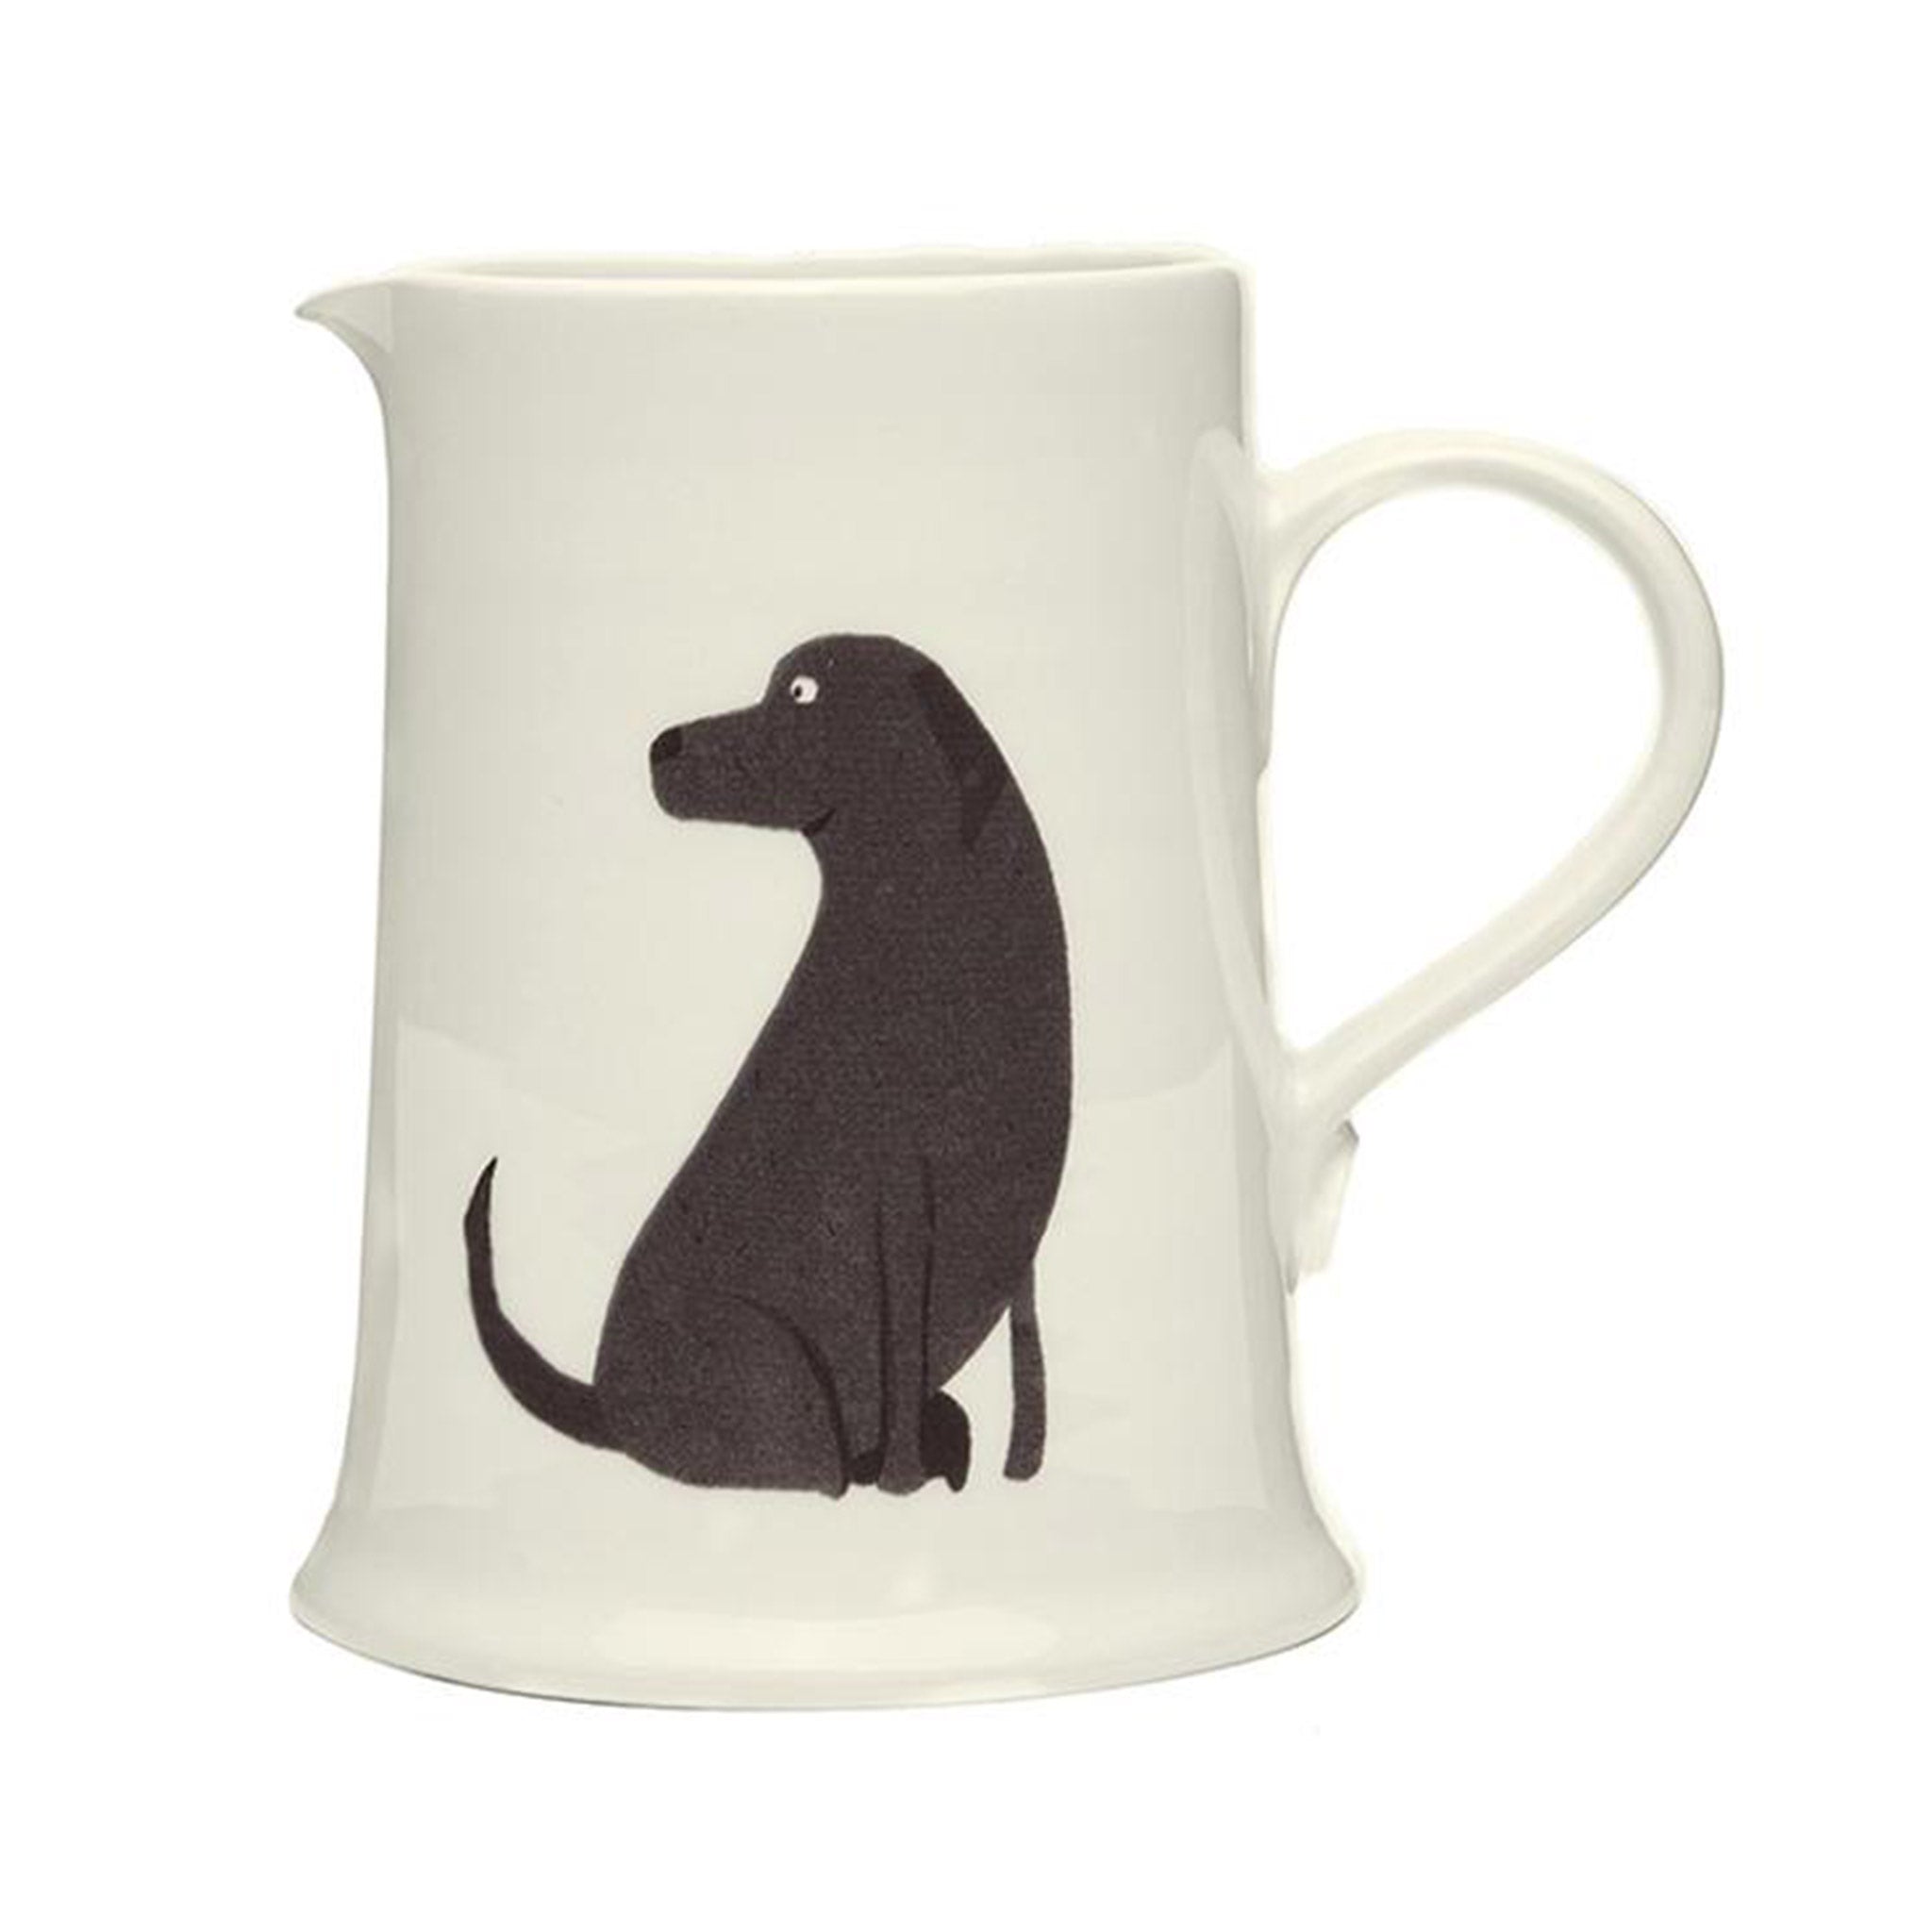 A close up of a white ceramic jug with an illustration of a Labrador on the outside.